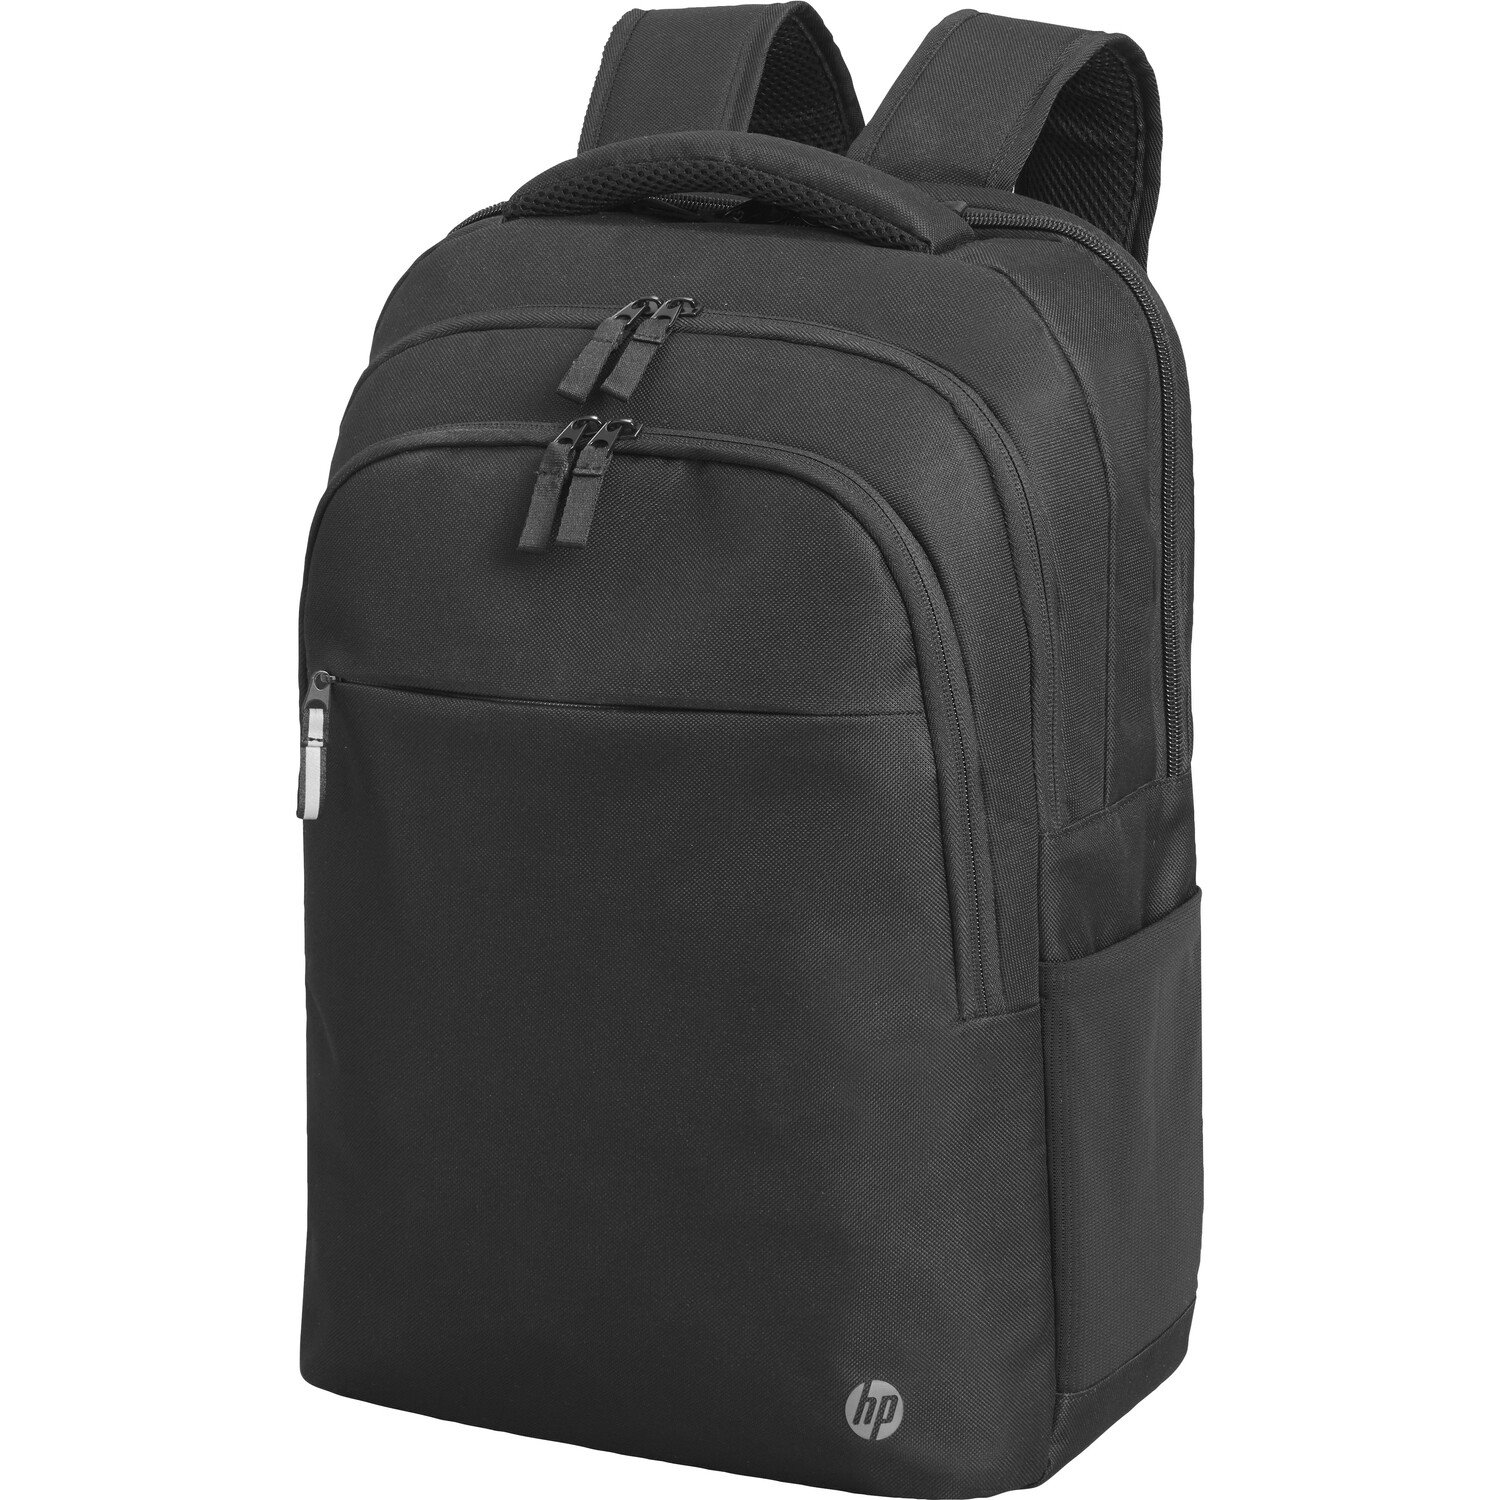 HP Renew Carrying Case (Backpack) for 43.9 cm (17.3") Notebook, Credit Card, Power Bank - Black